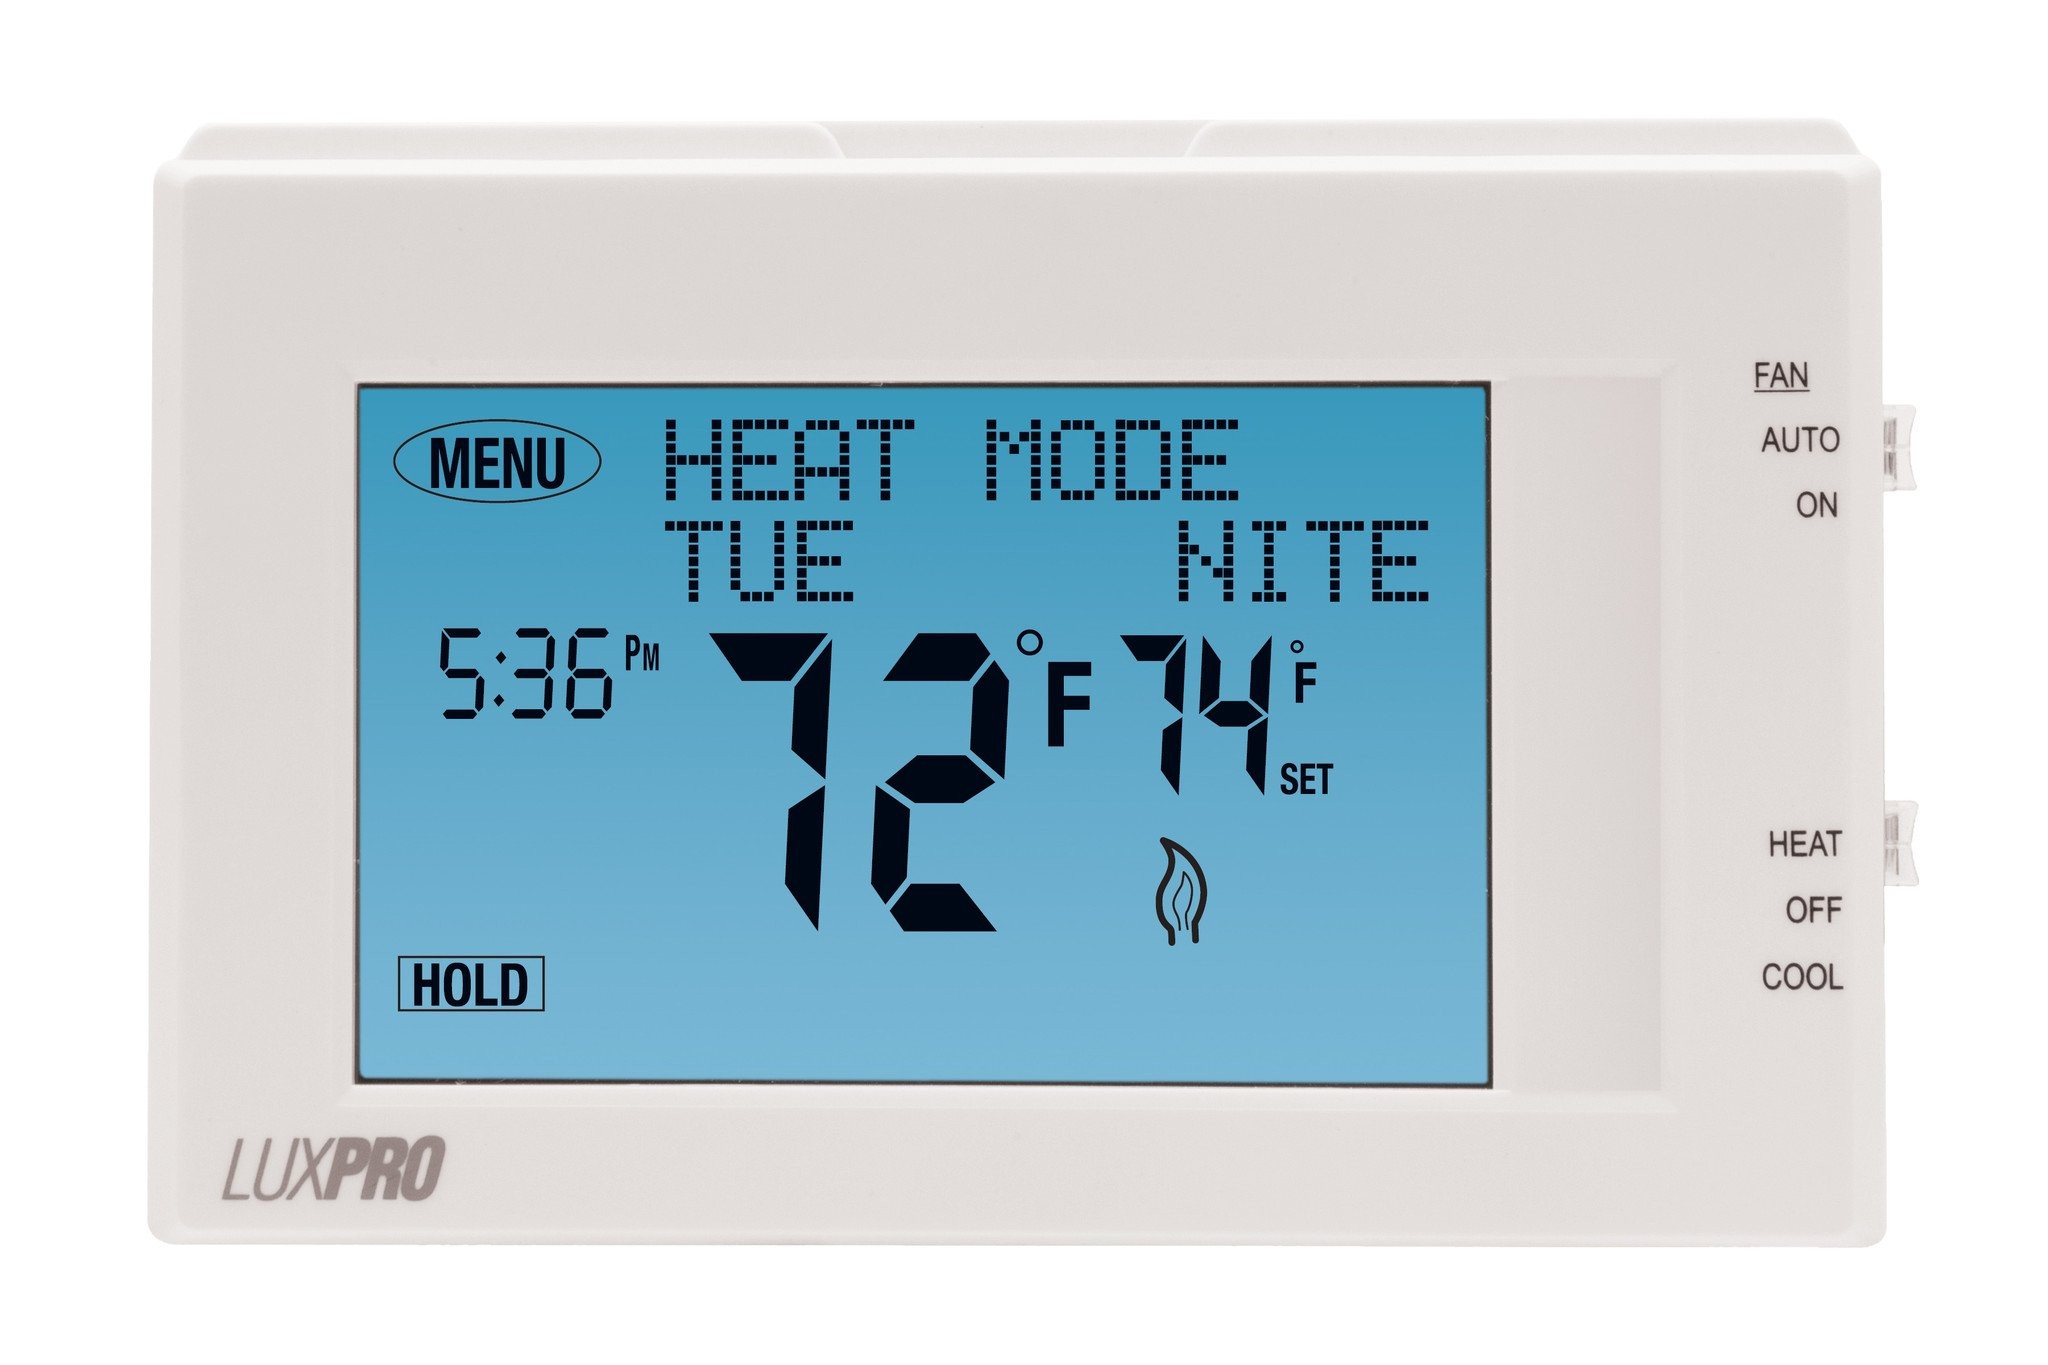 LuxPro P721UT PROGRAMMABLE THERMOSTAT 7 DAY PROGRAMMABLE MULTI STAGE TOUCHSCREEN 2 HEAT